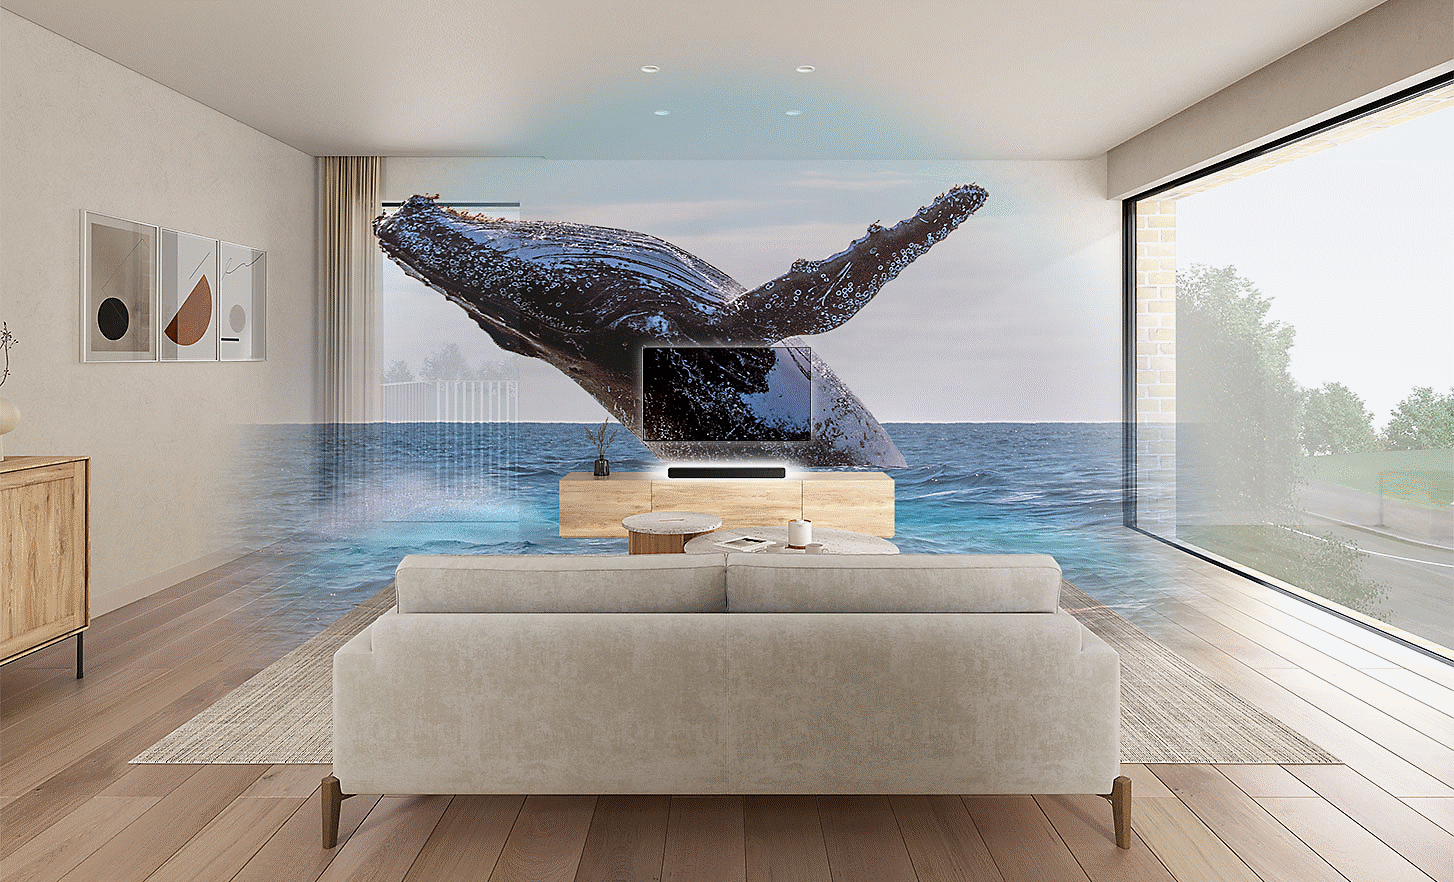 Image of a living room with a TV and HT-S2000 soundbar in the middle, a watermarked image of a whale sits over the top